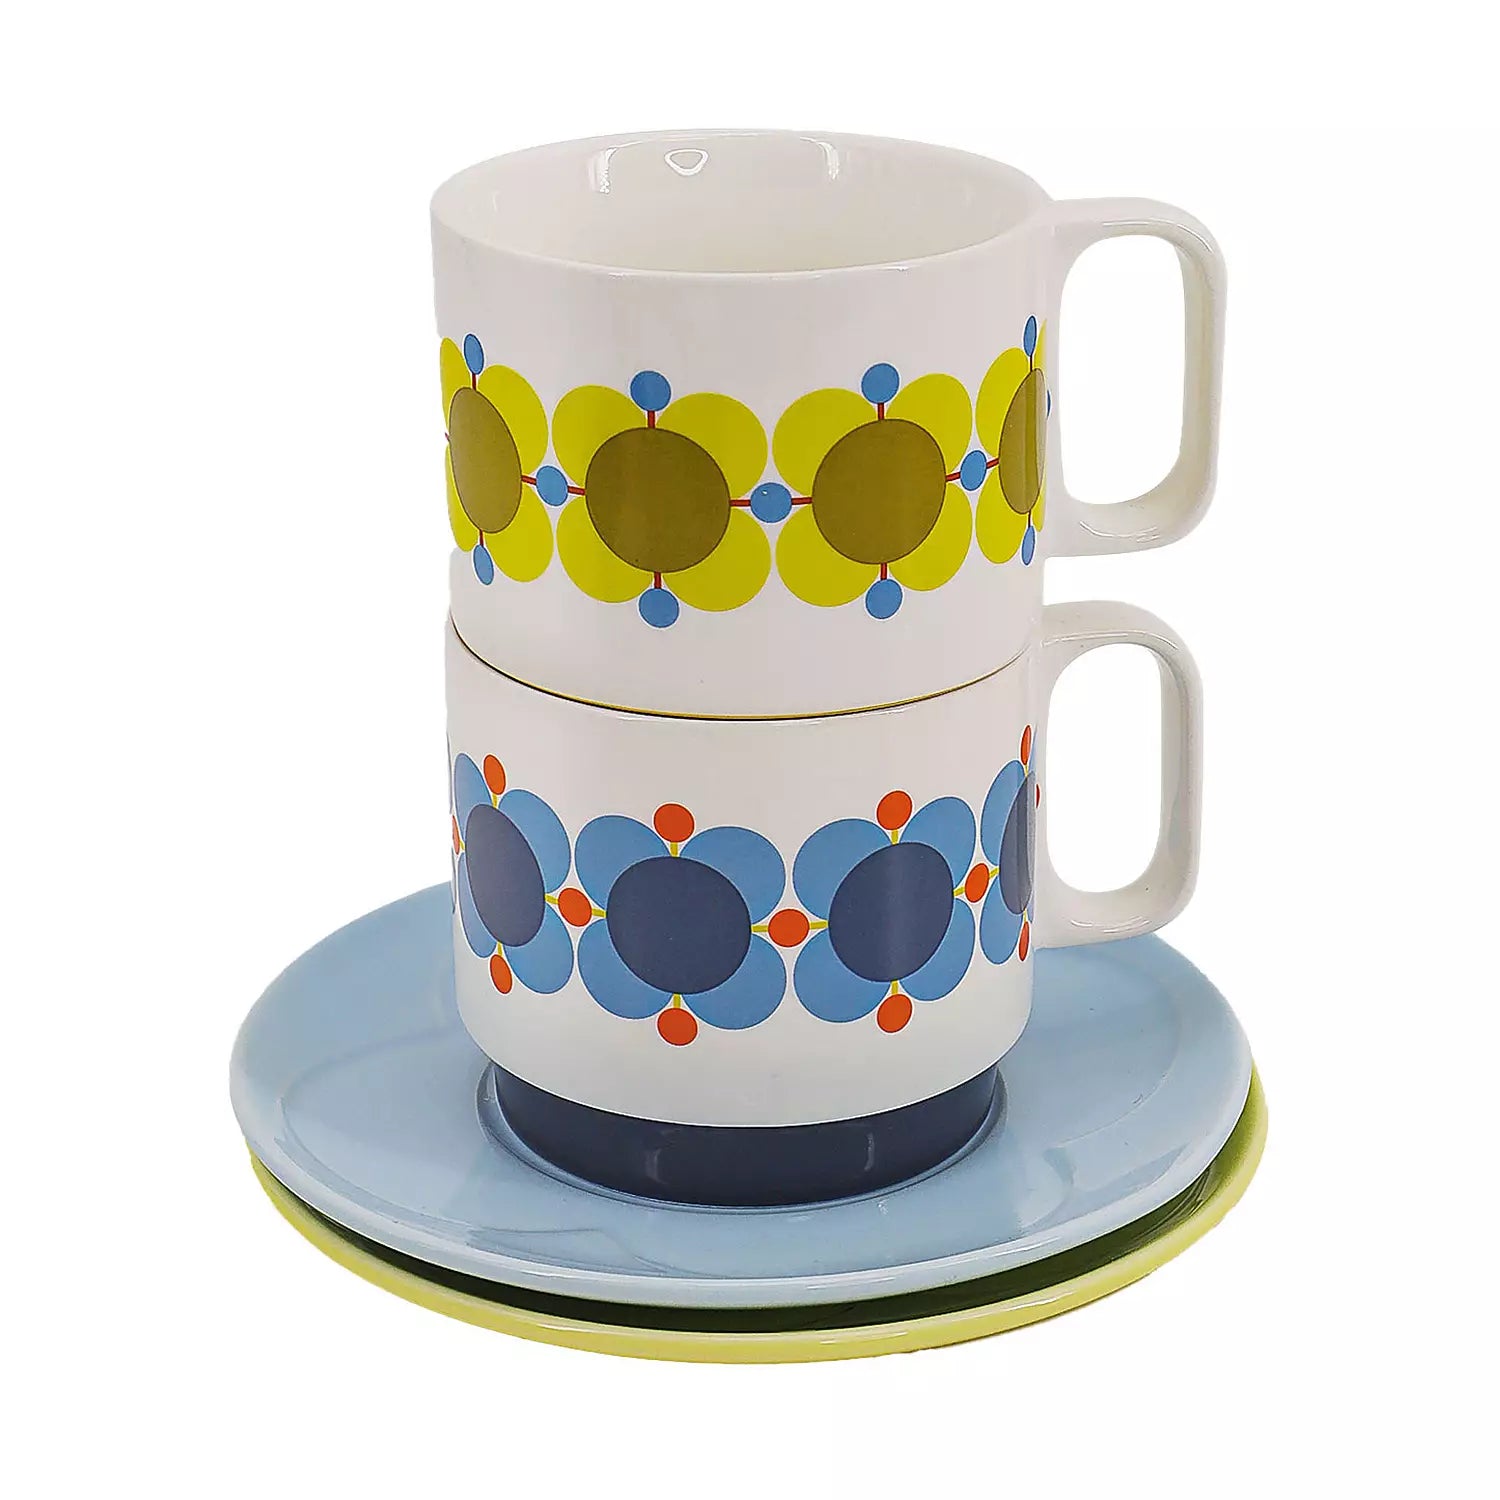 Orla Kiely Atomic Flower Cappuccino Cup & Saucer Set of 2. - Last chance to buy